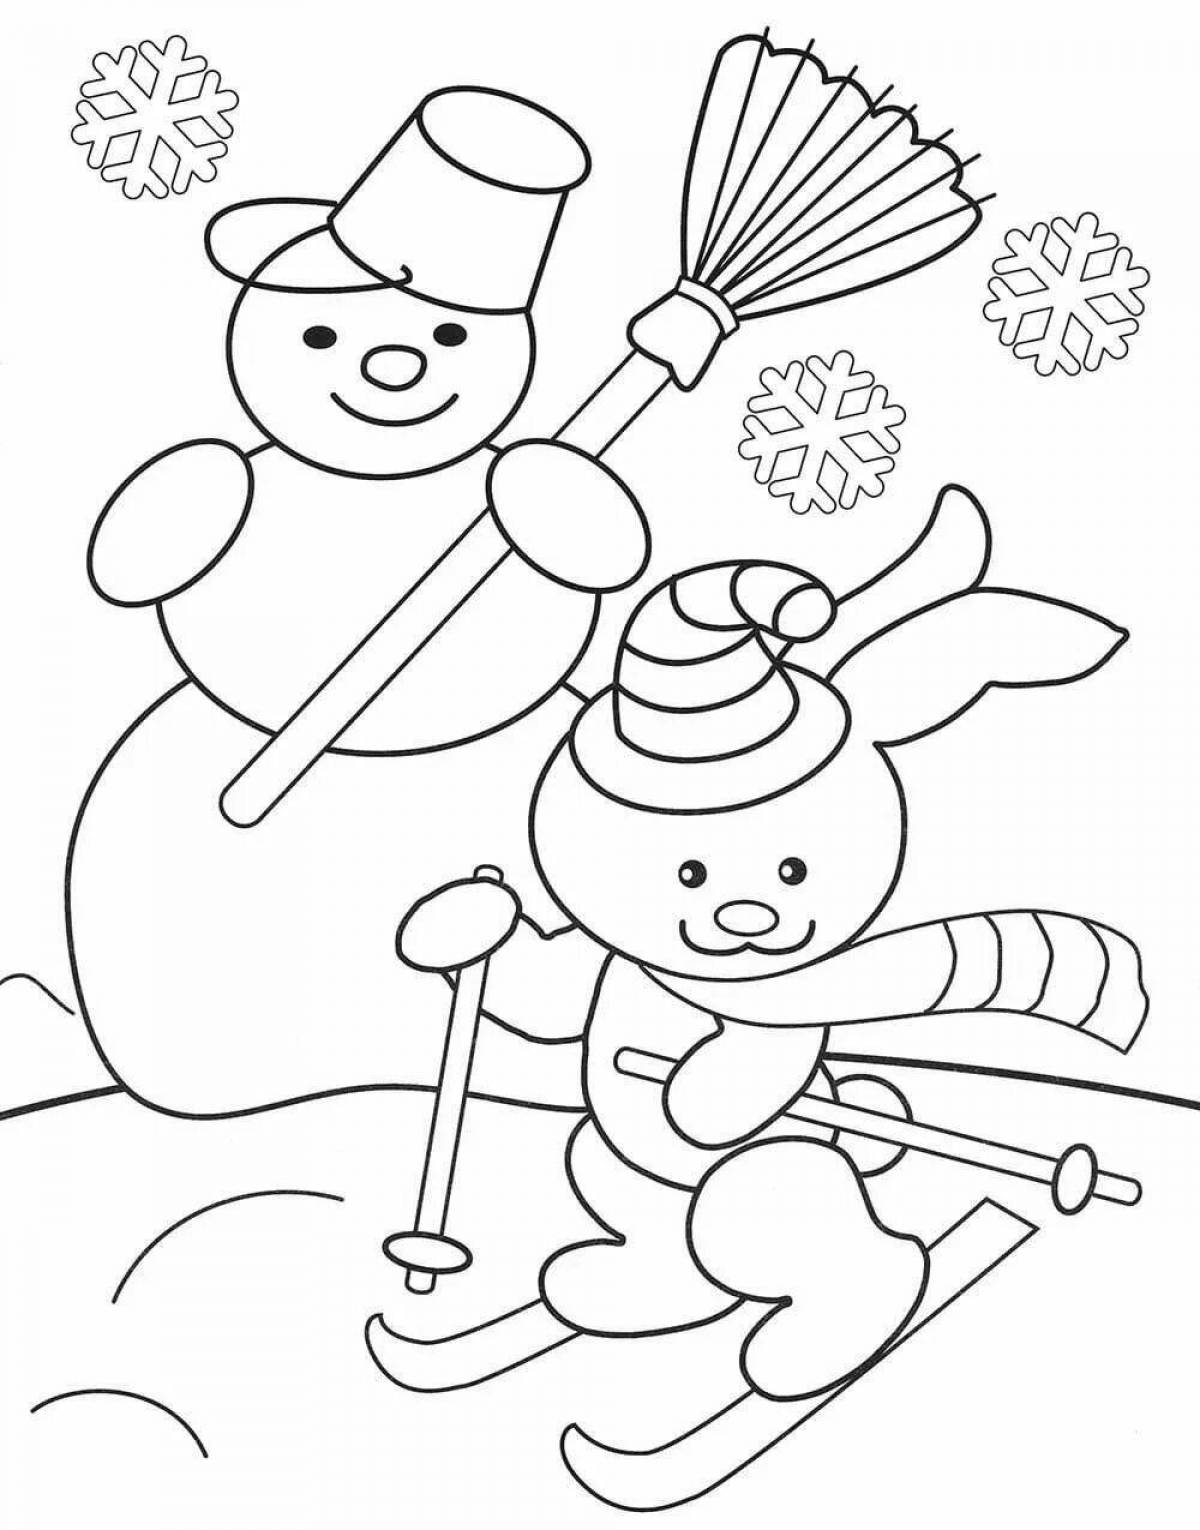 Exciting winter coloring book for kids 2 3